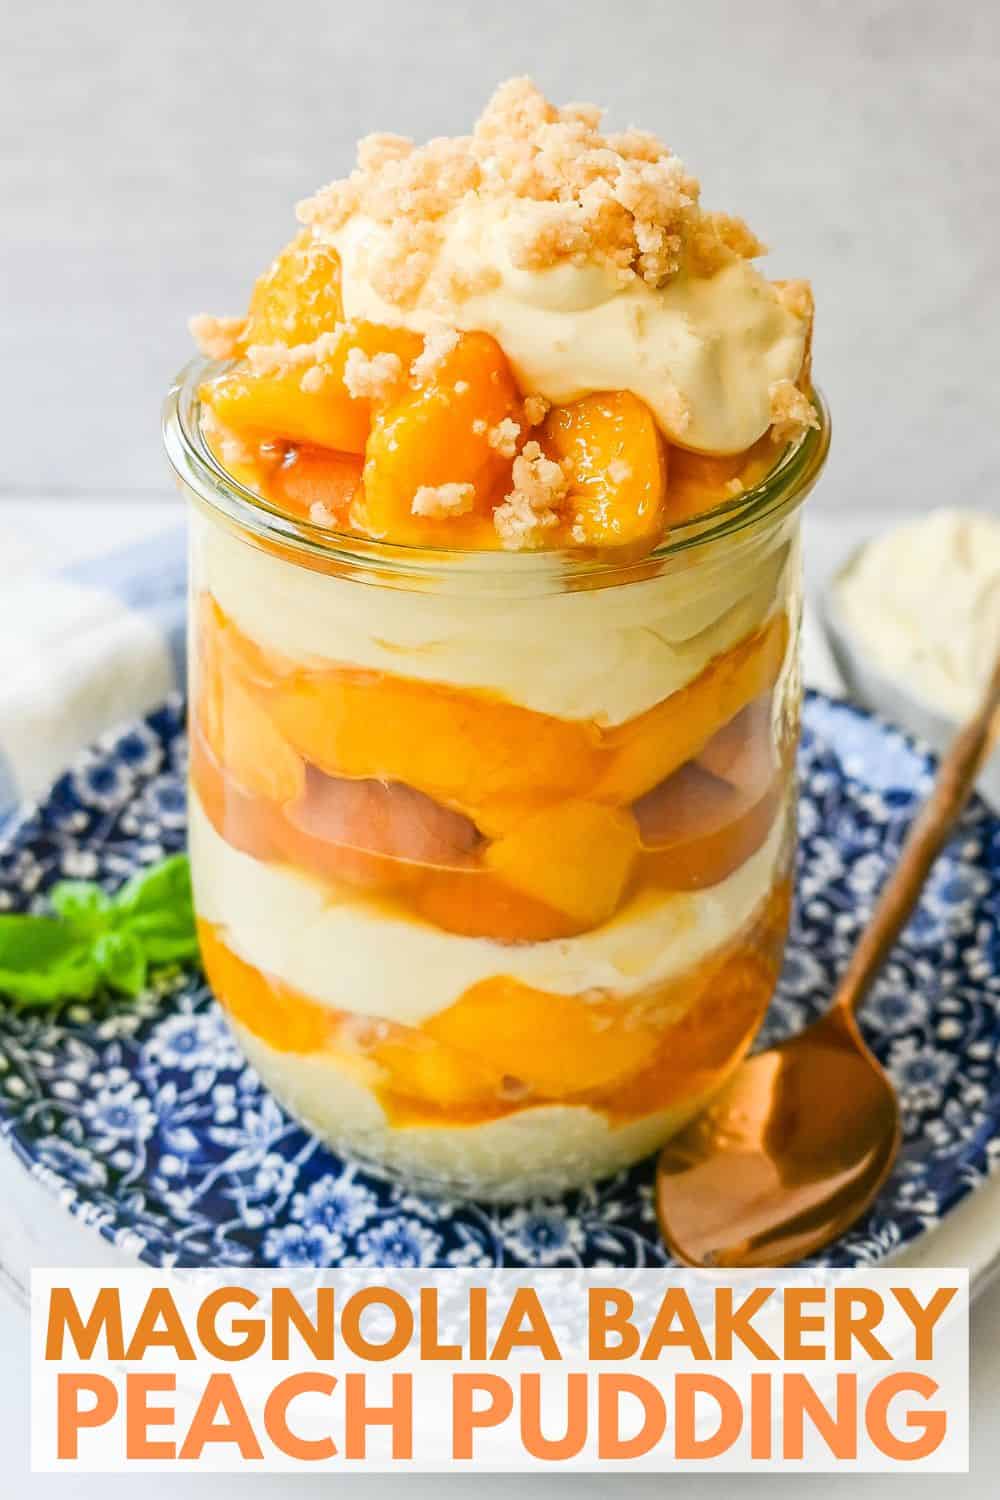 This summer dessert is made with fresh peaches in a creamy vanilla pudding and whipped cream with Nilla wafers and a buttery crumble topping. This Magnolia Bakery Peach Crisp Pudding will be your favorite no-bake summer dessert recipe. It is like banana pudding but even better!